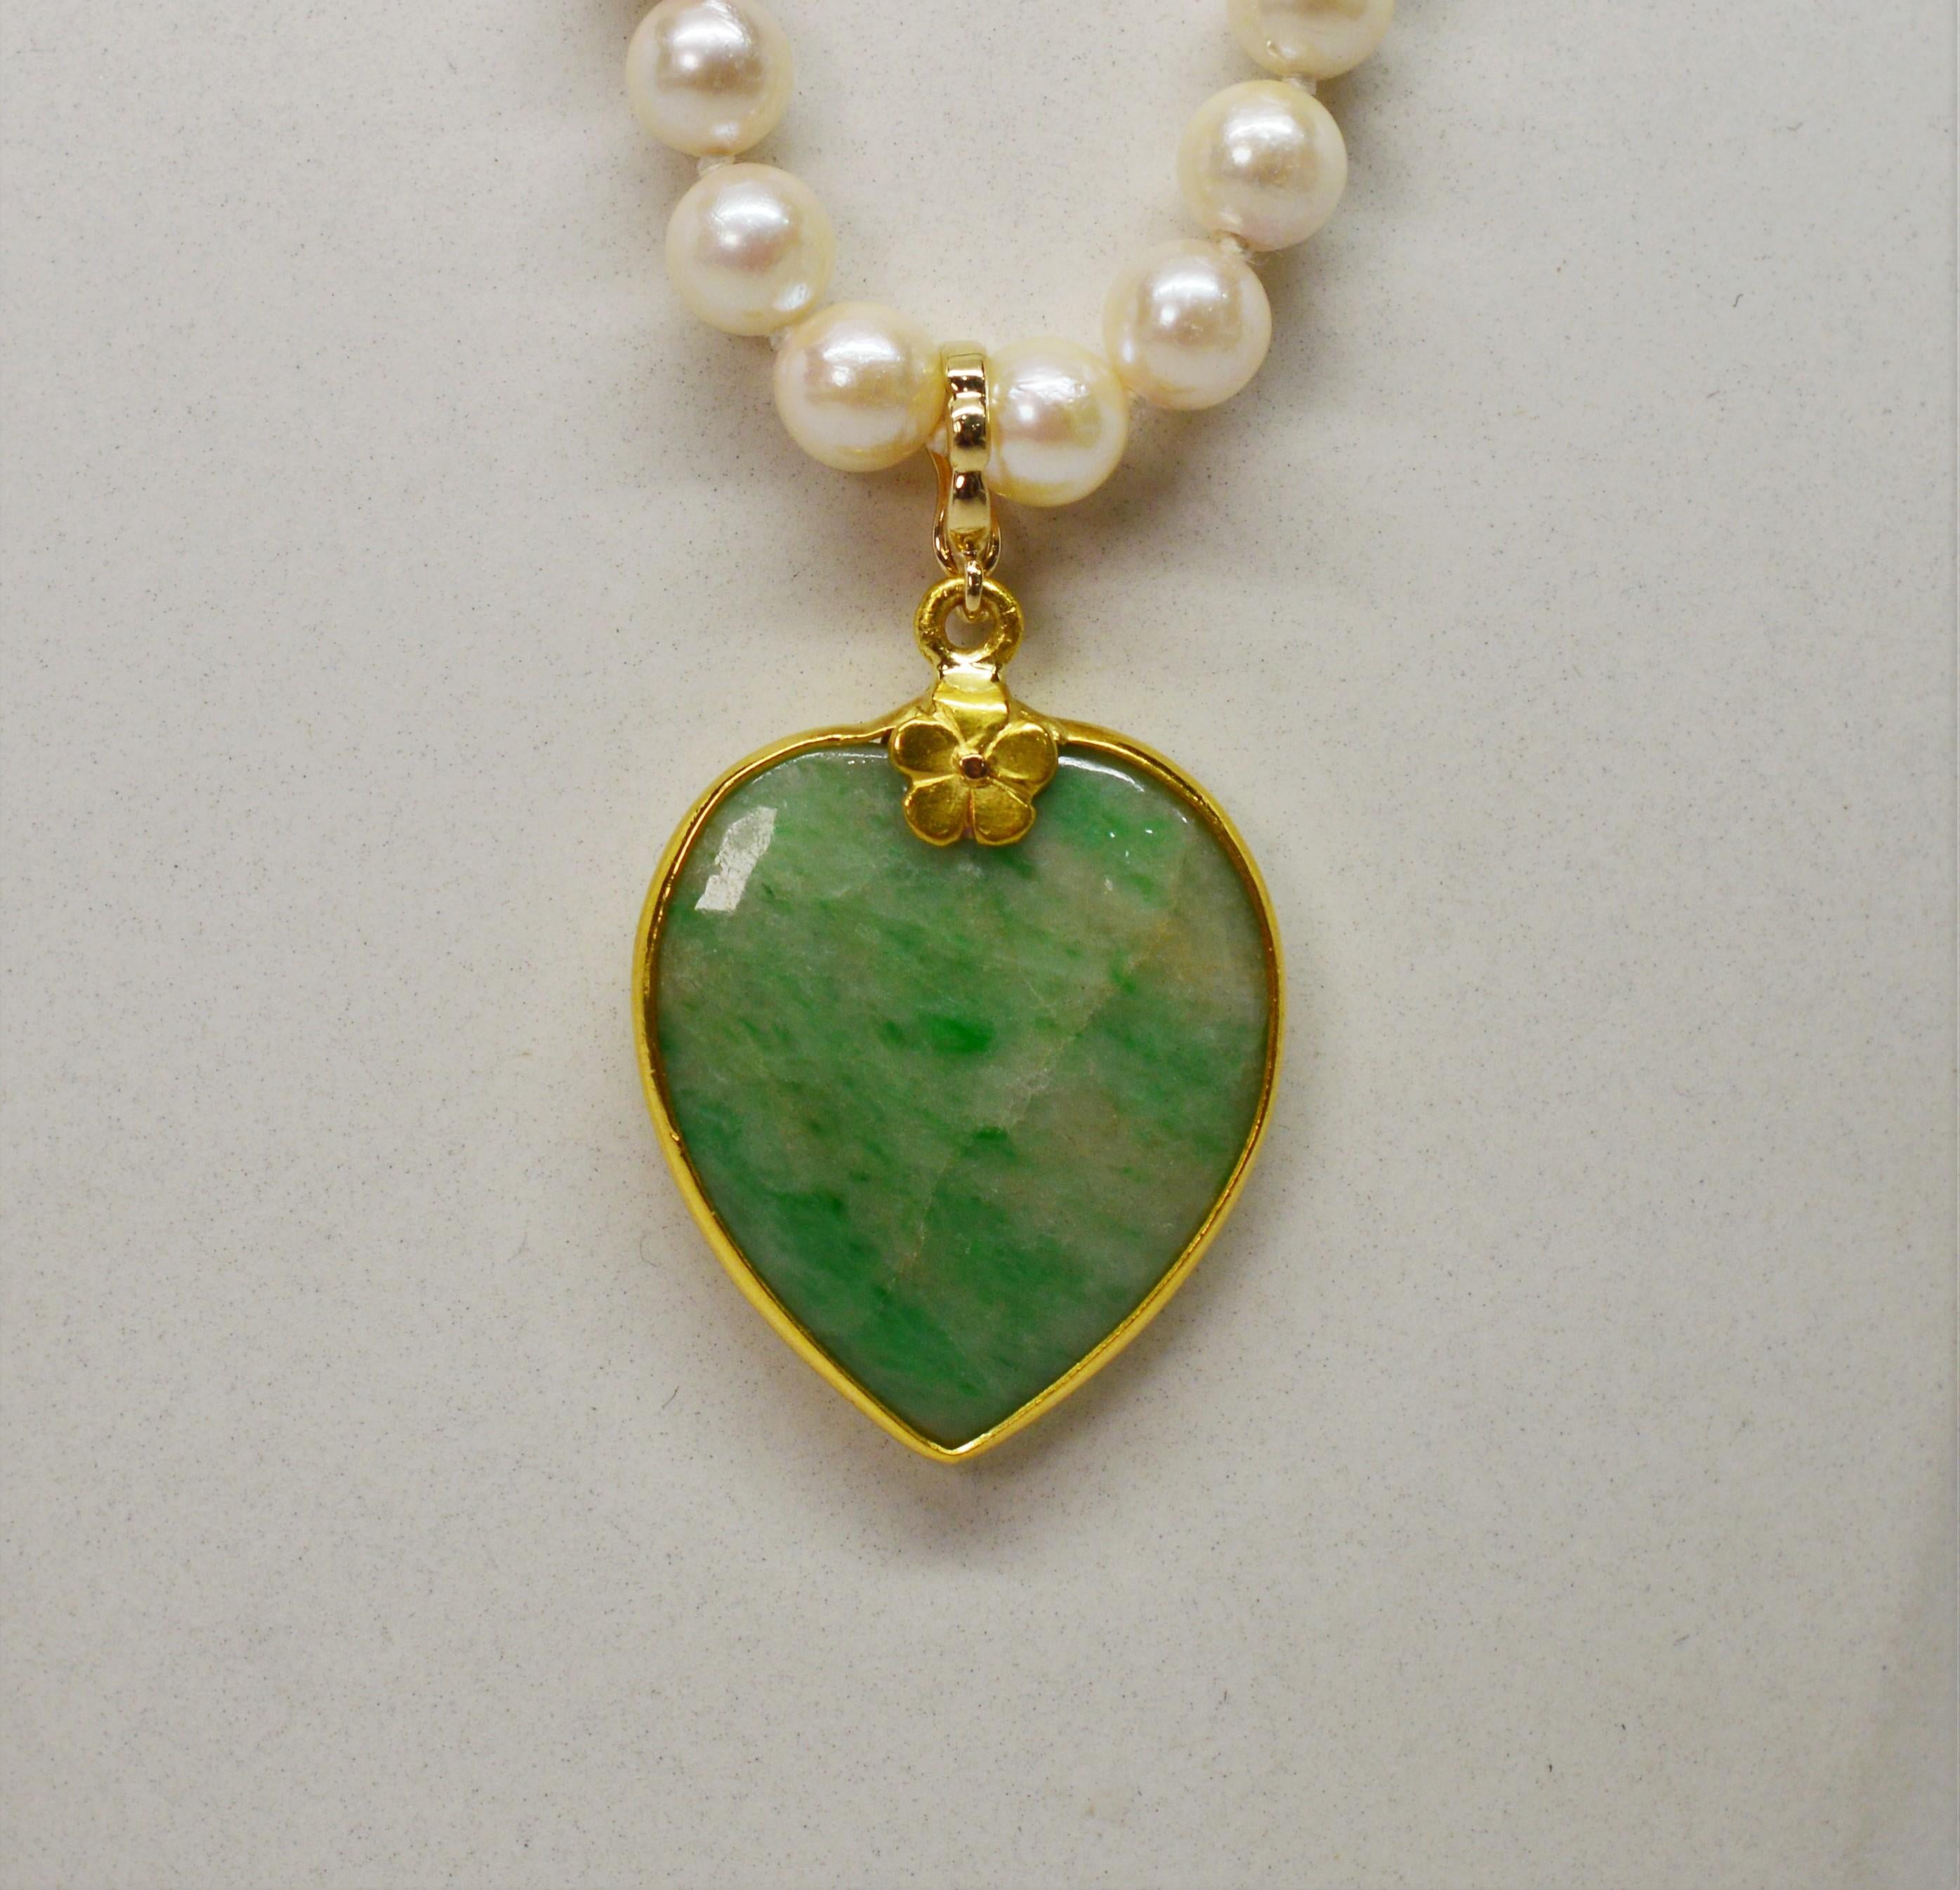 pearl necklace with jade pendant